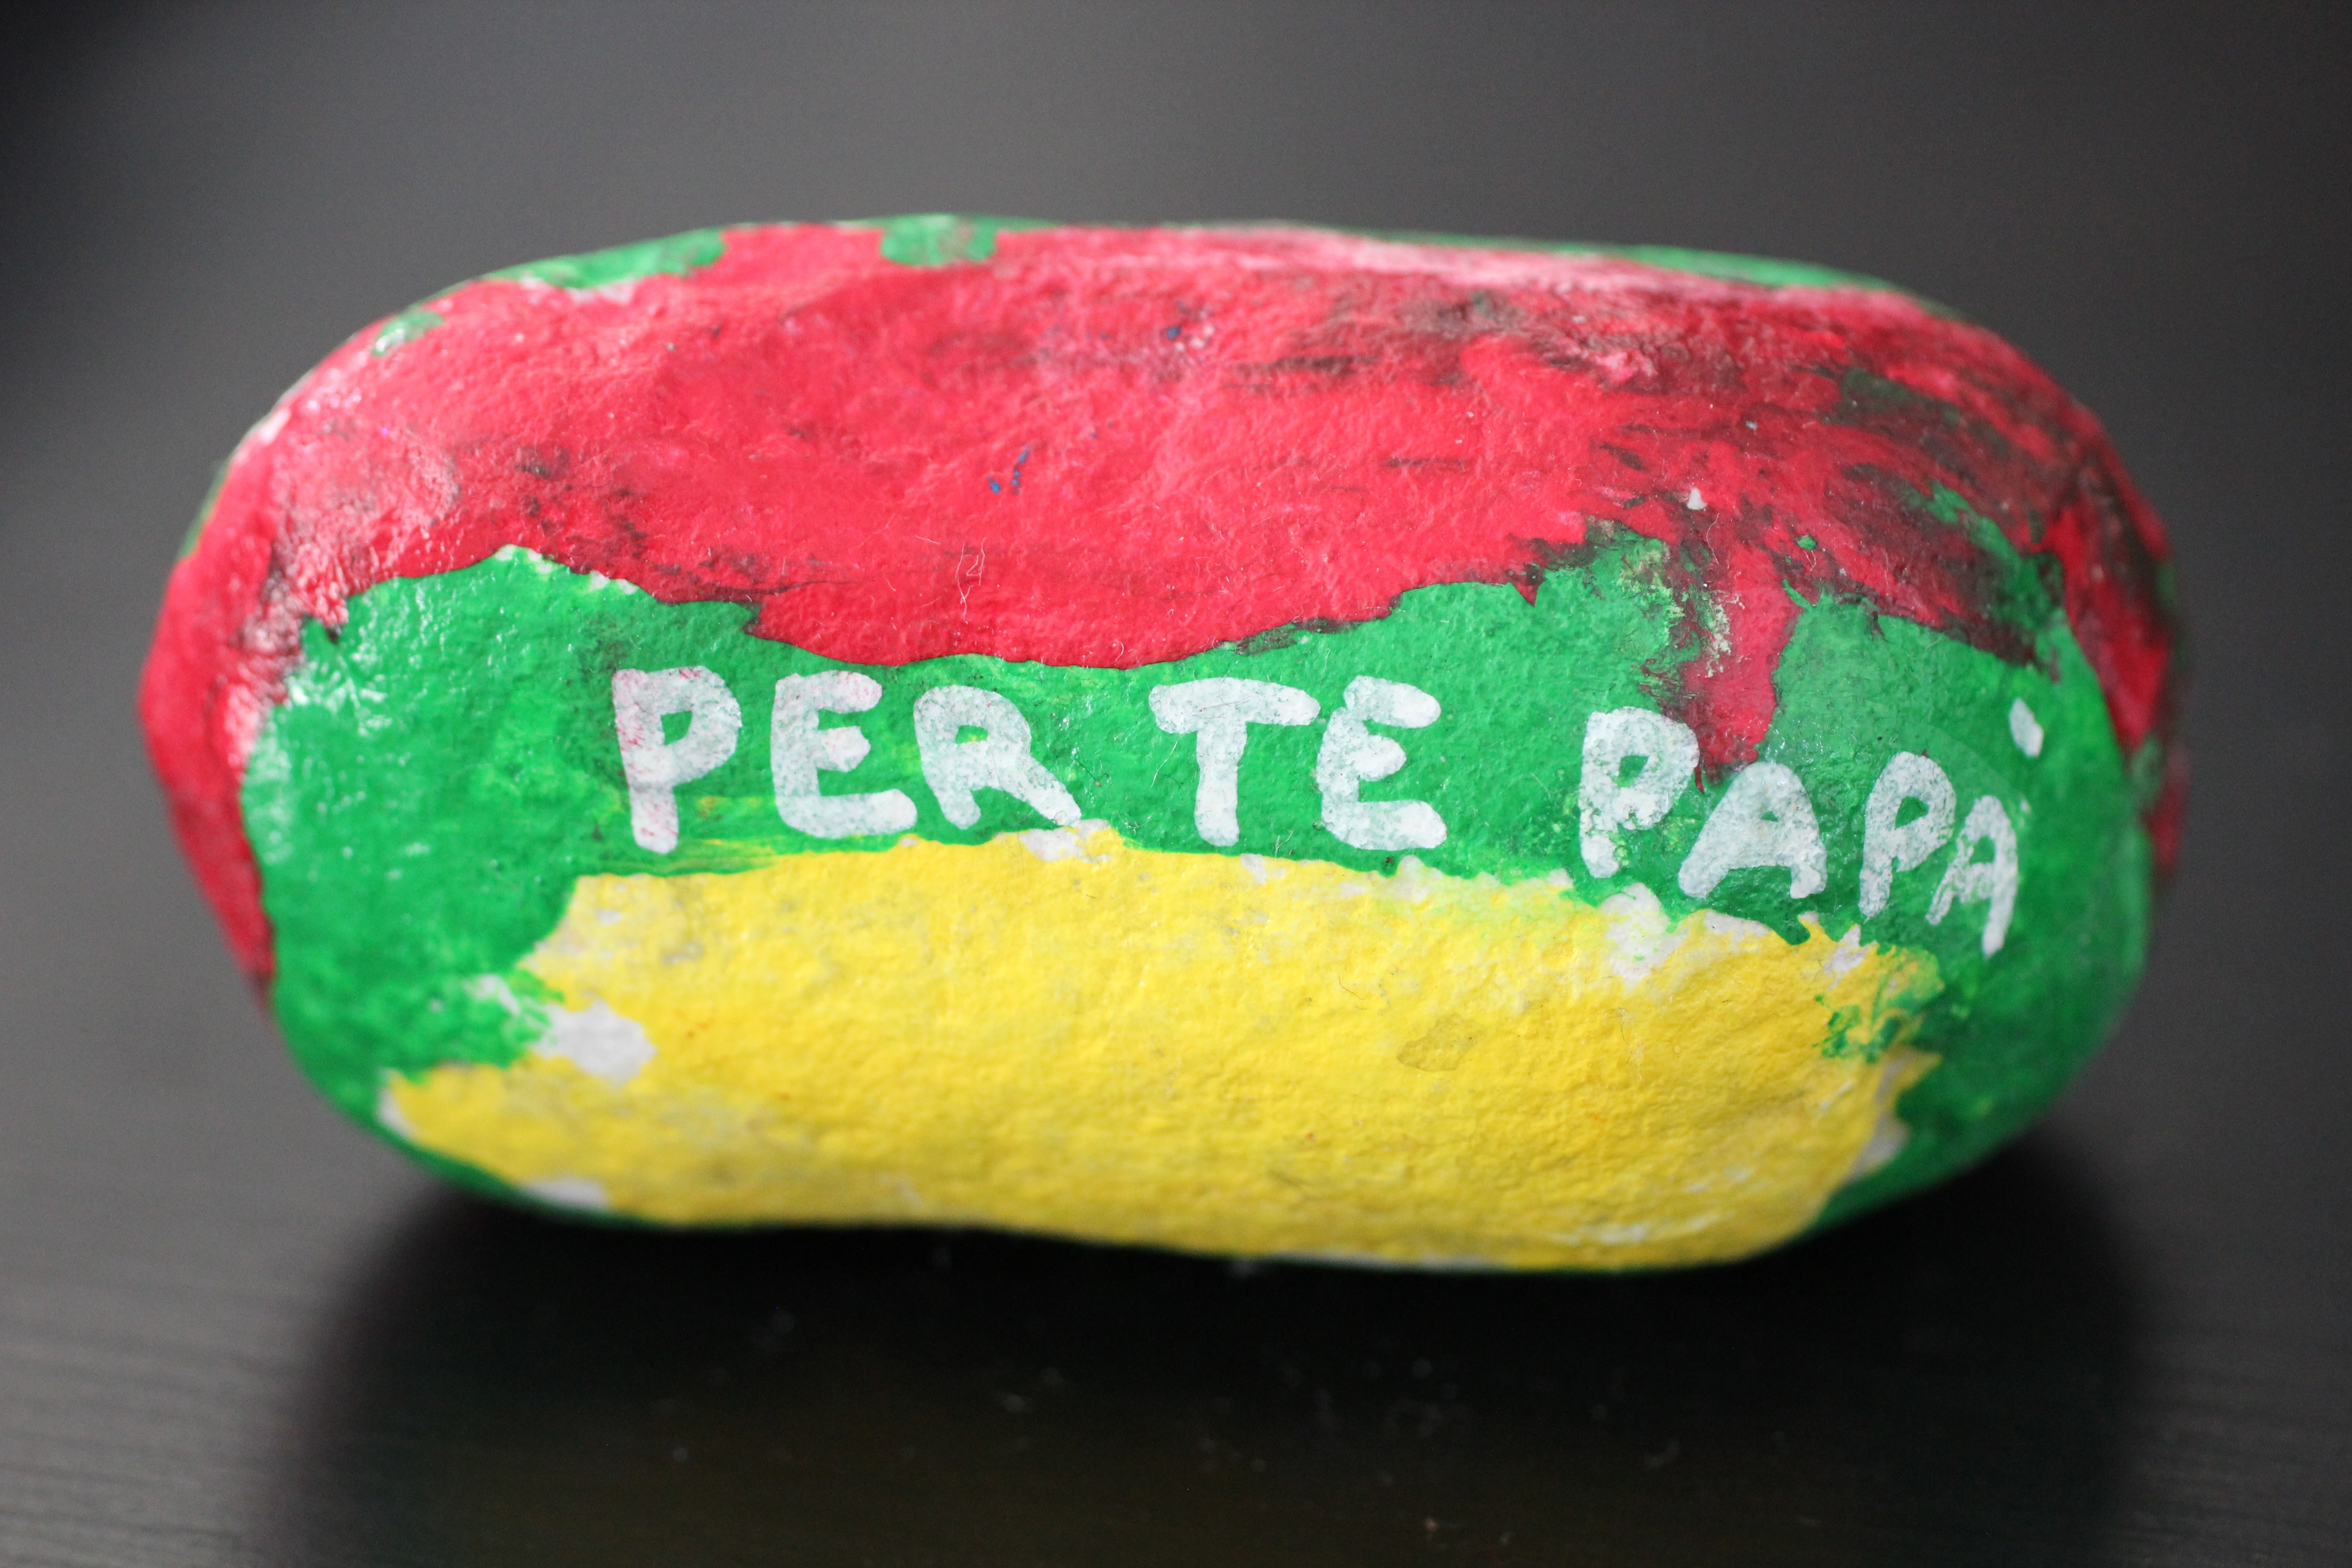 red green and yellow perte papa decorative oval stone